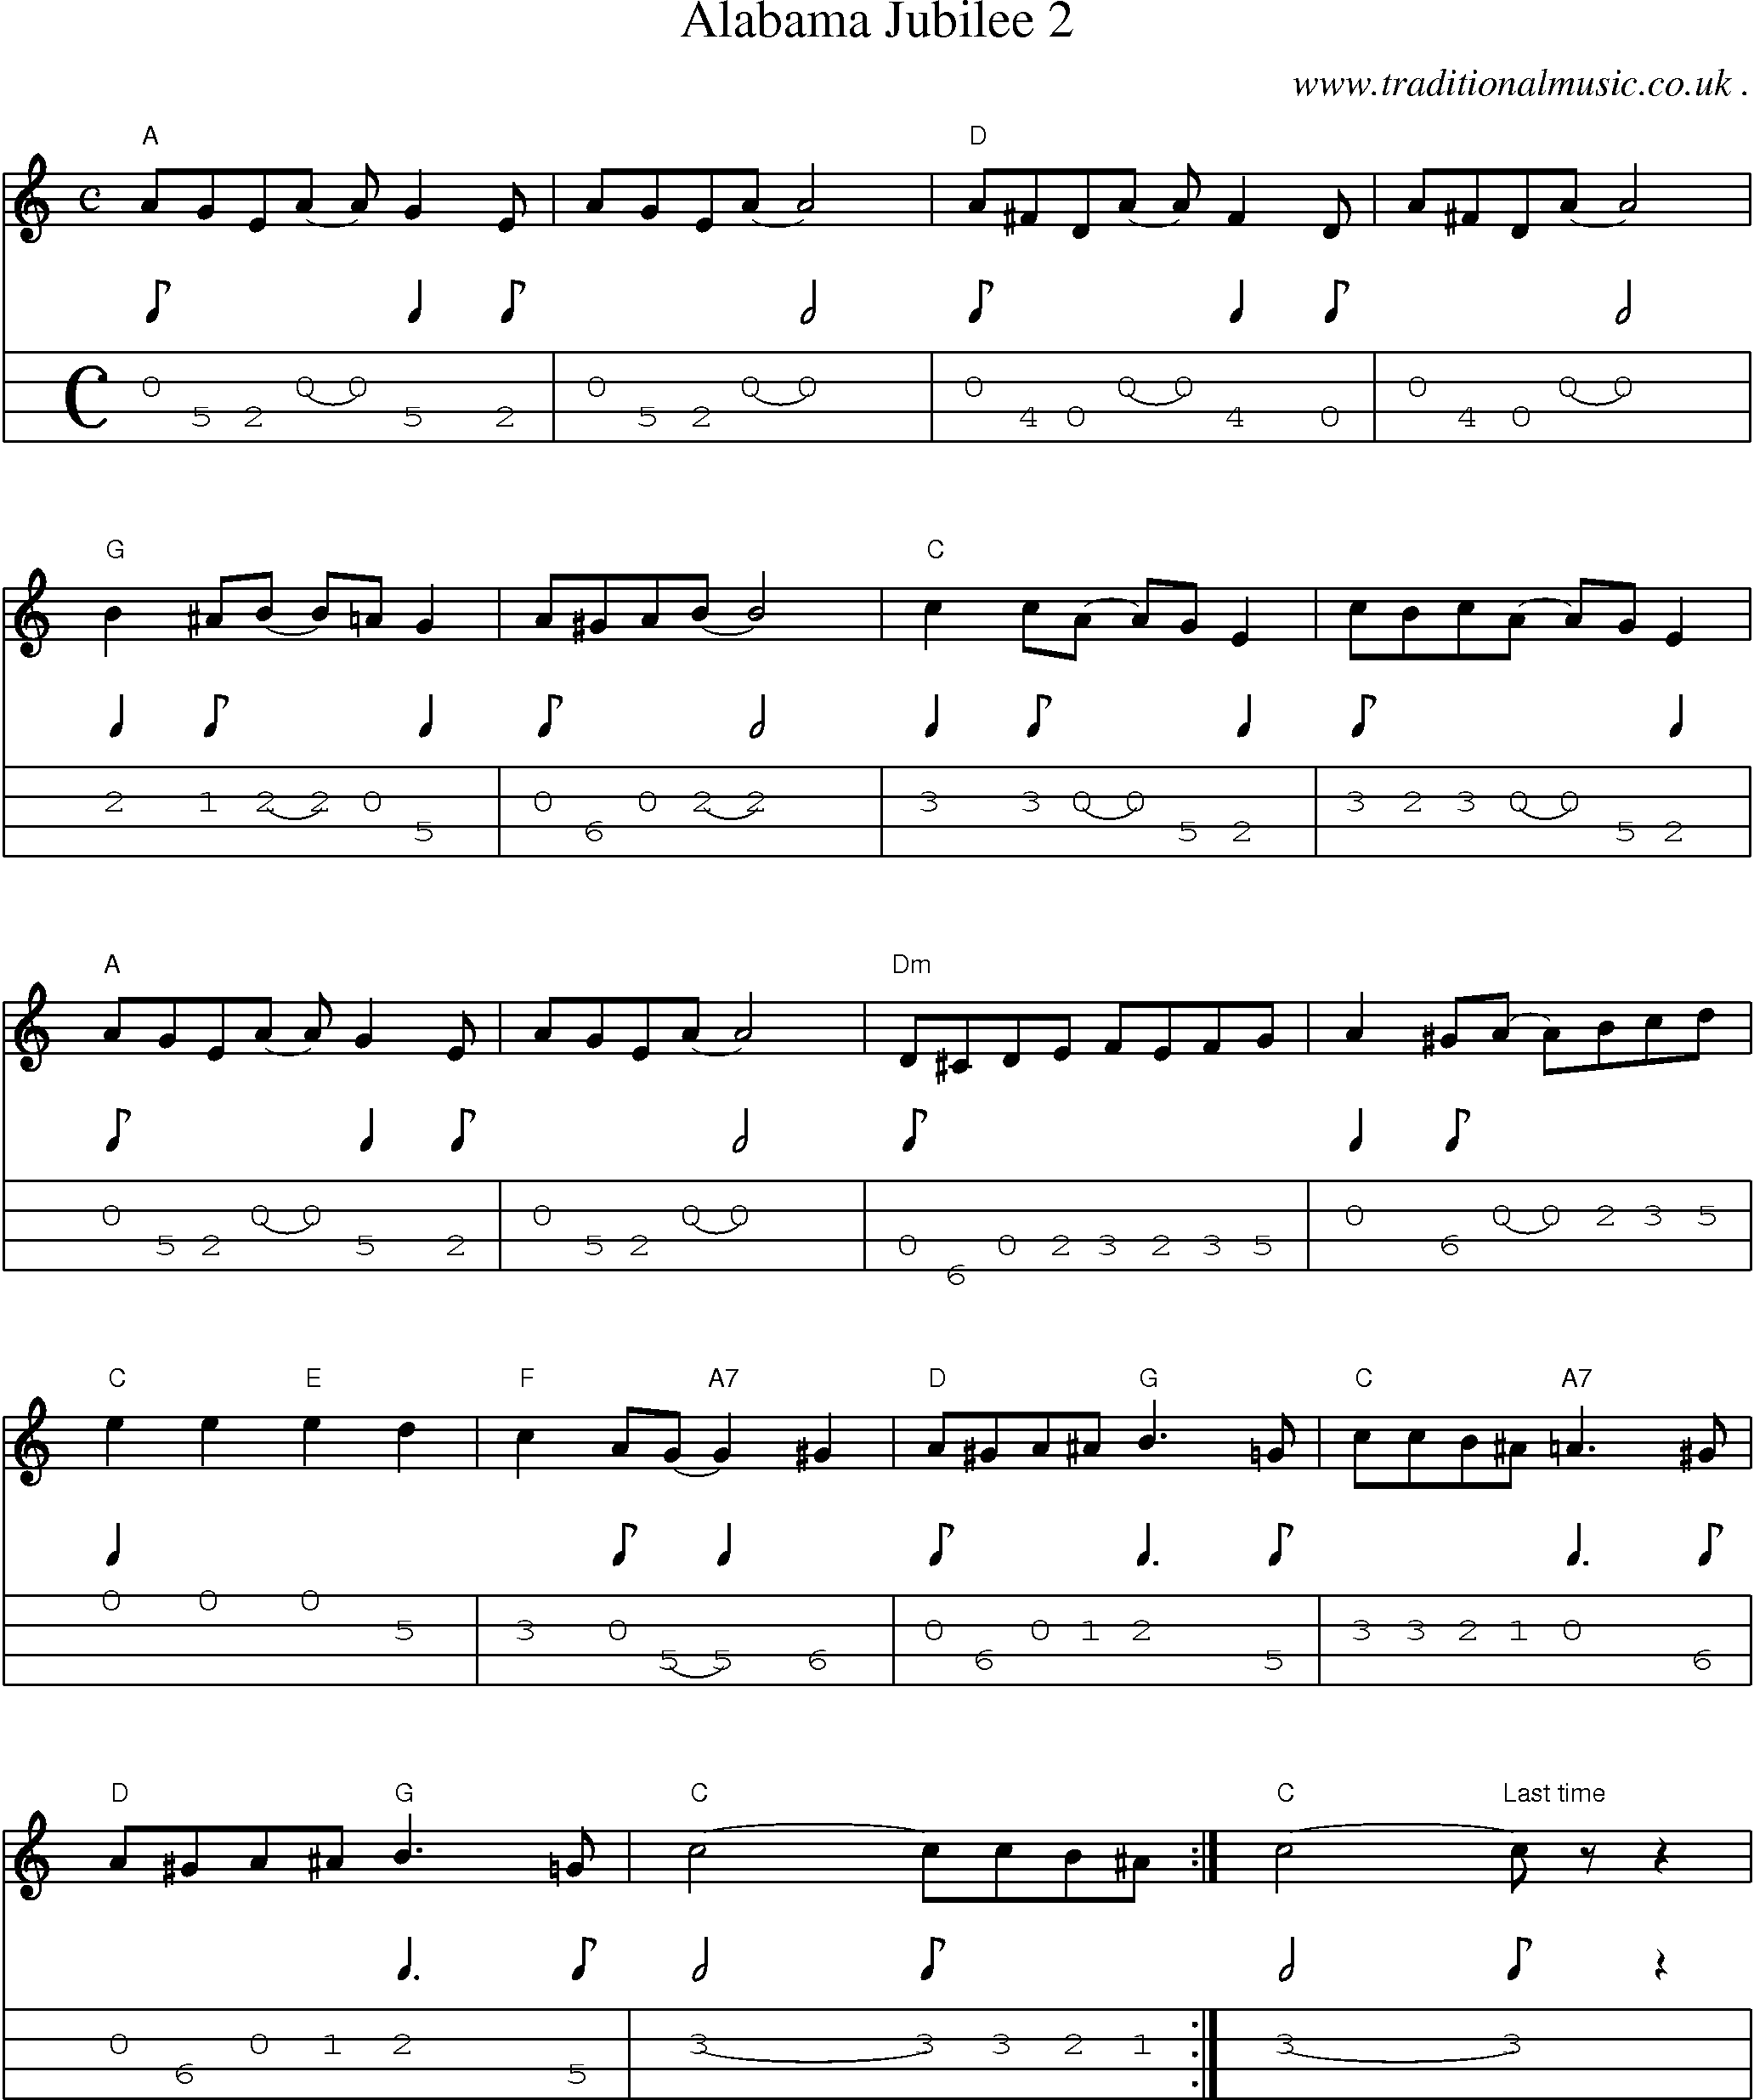 Music Score and Mandolin Tabs for Alabama Jubilee 2